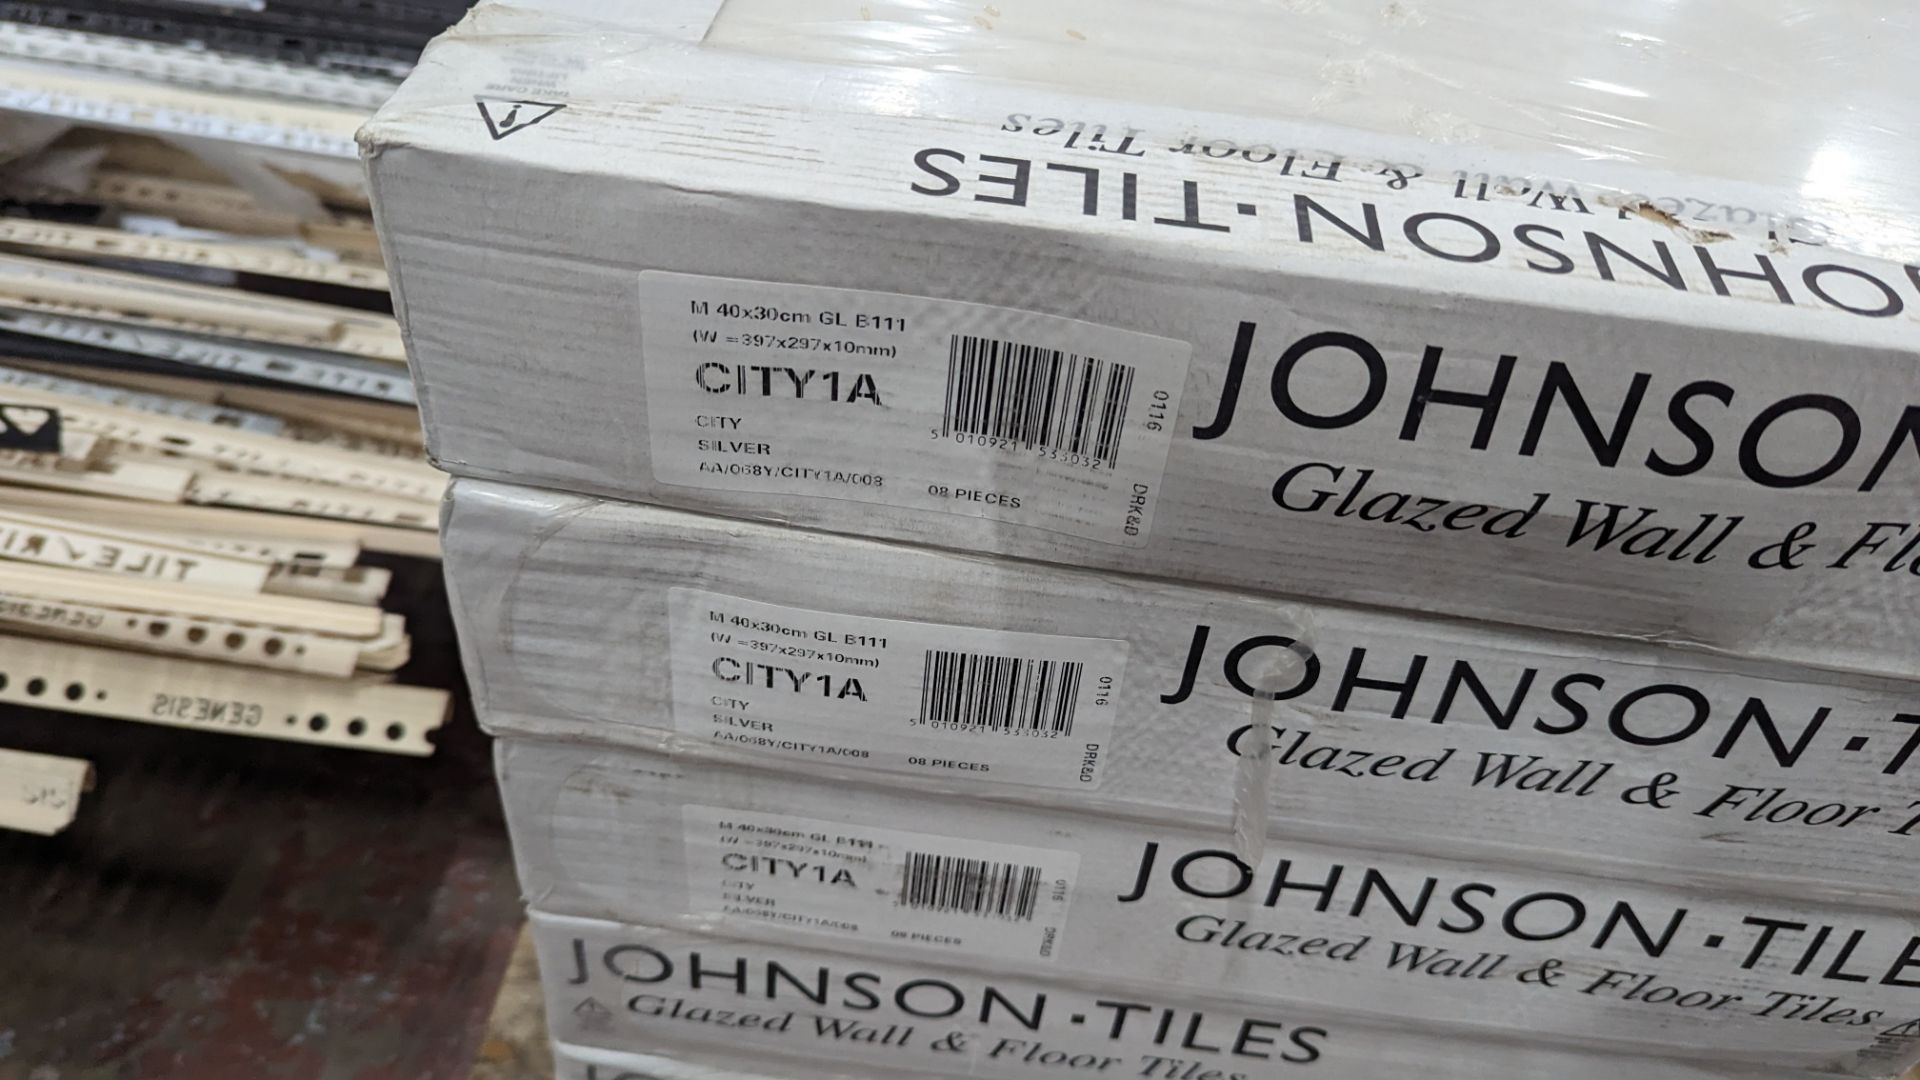 16 packs of Johnson glazed wall and floor tiles, each pack contains 5 tiles. Each tile measures 397m - Image 4 of 6